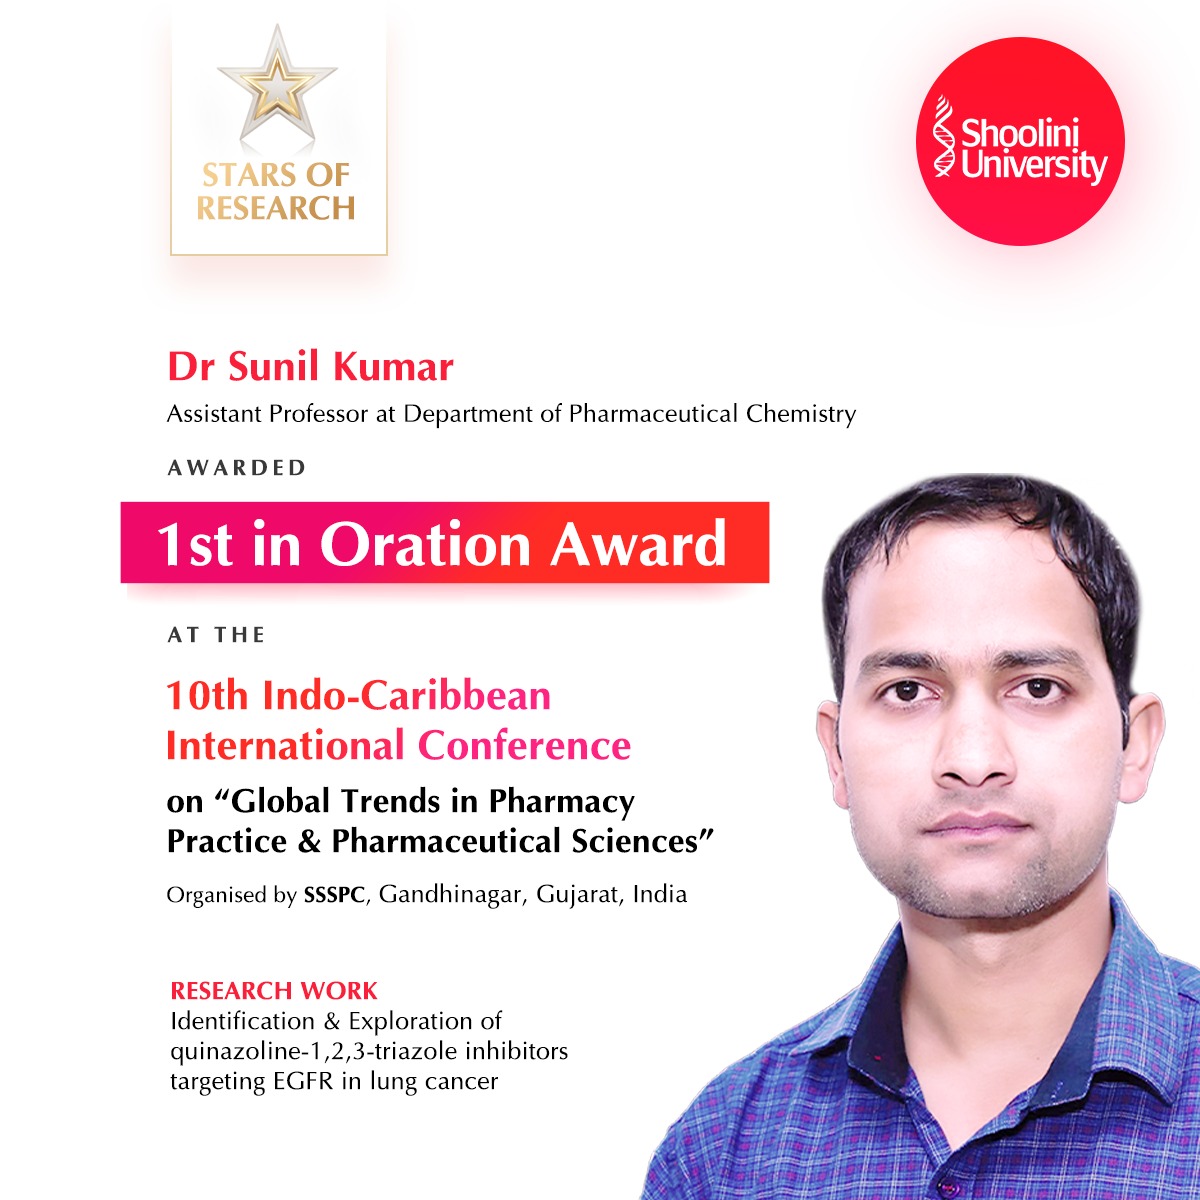 Congratulations to Asst Prof Sunil Kumar (Department of Pharmaceutical Chemistry) for being awarded 1st in Oration Award for his research work in the Research Scholar Category.
Kudos to you sir. 🙌🏼

#research #researcharticle #researchers #lungcancer #pharmacy #researchuniversity